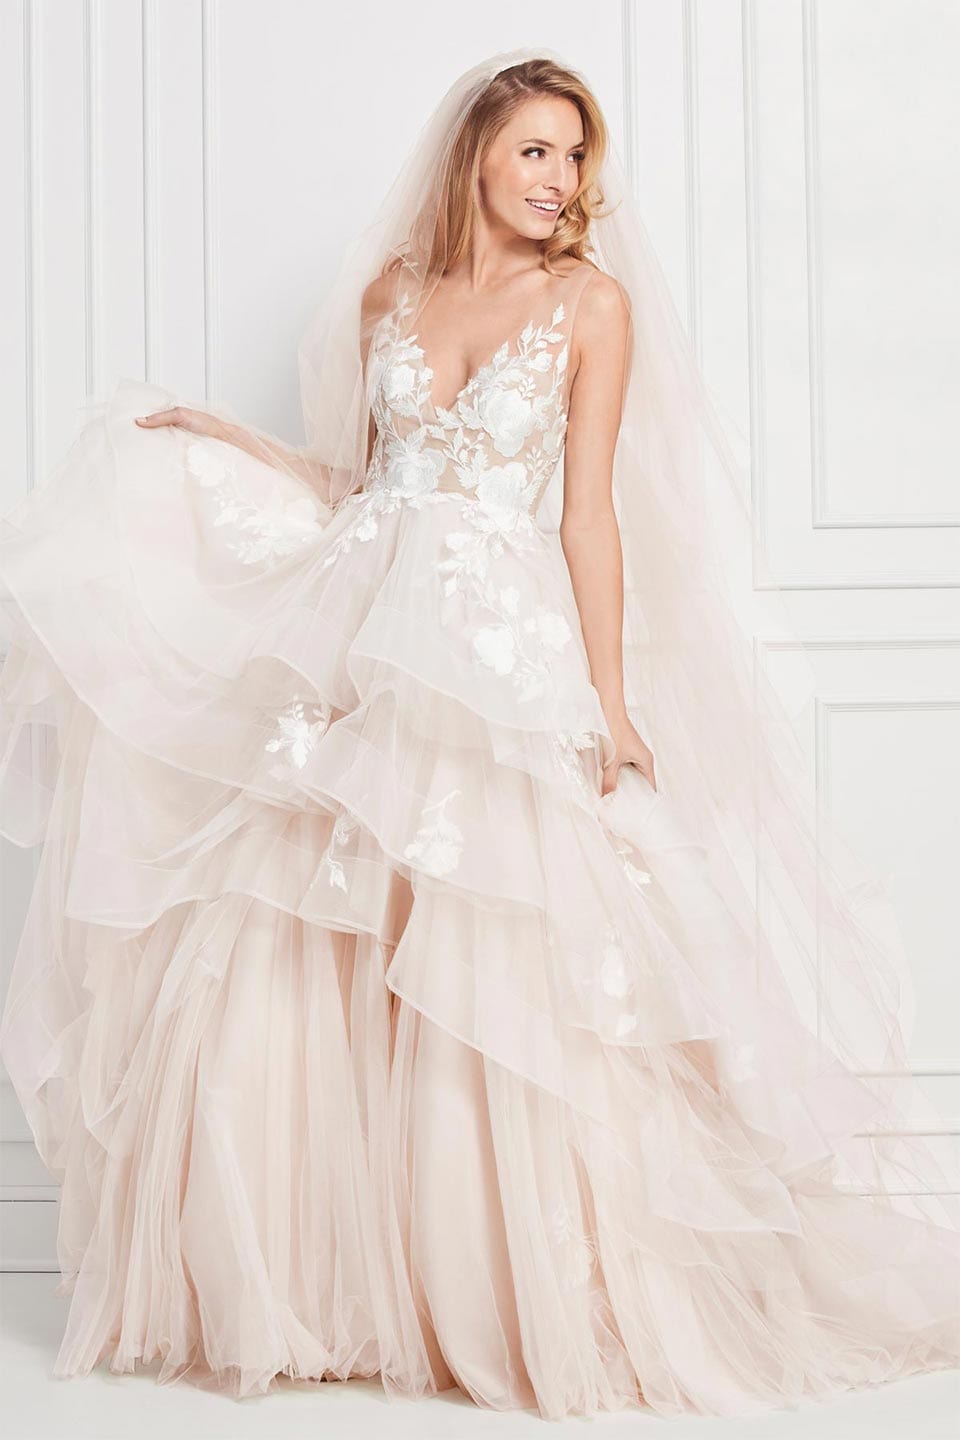 Bridal Gowns - Pearl's Bridal